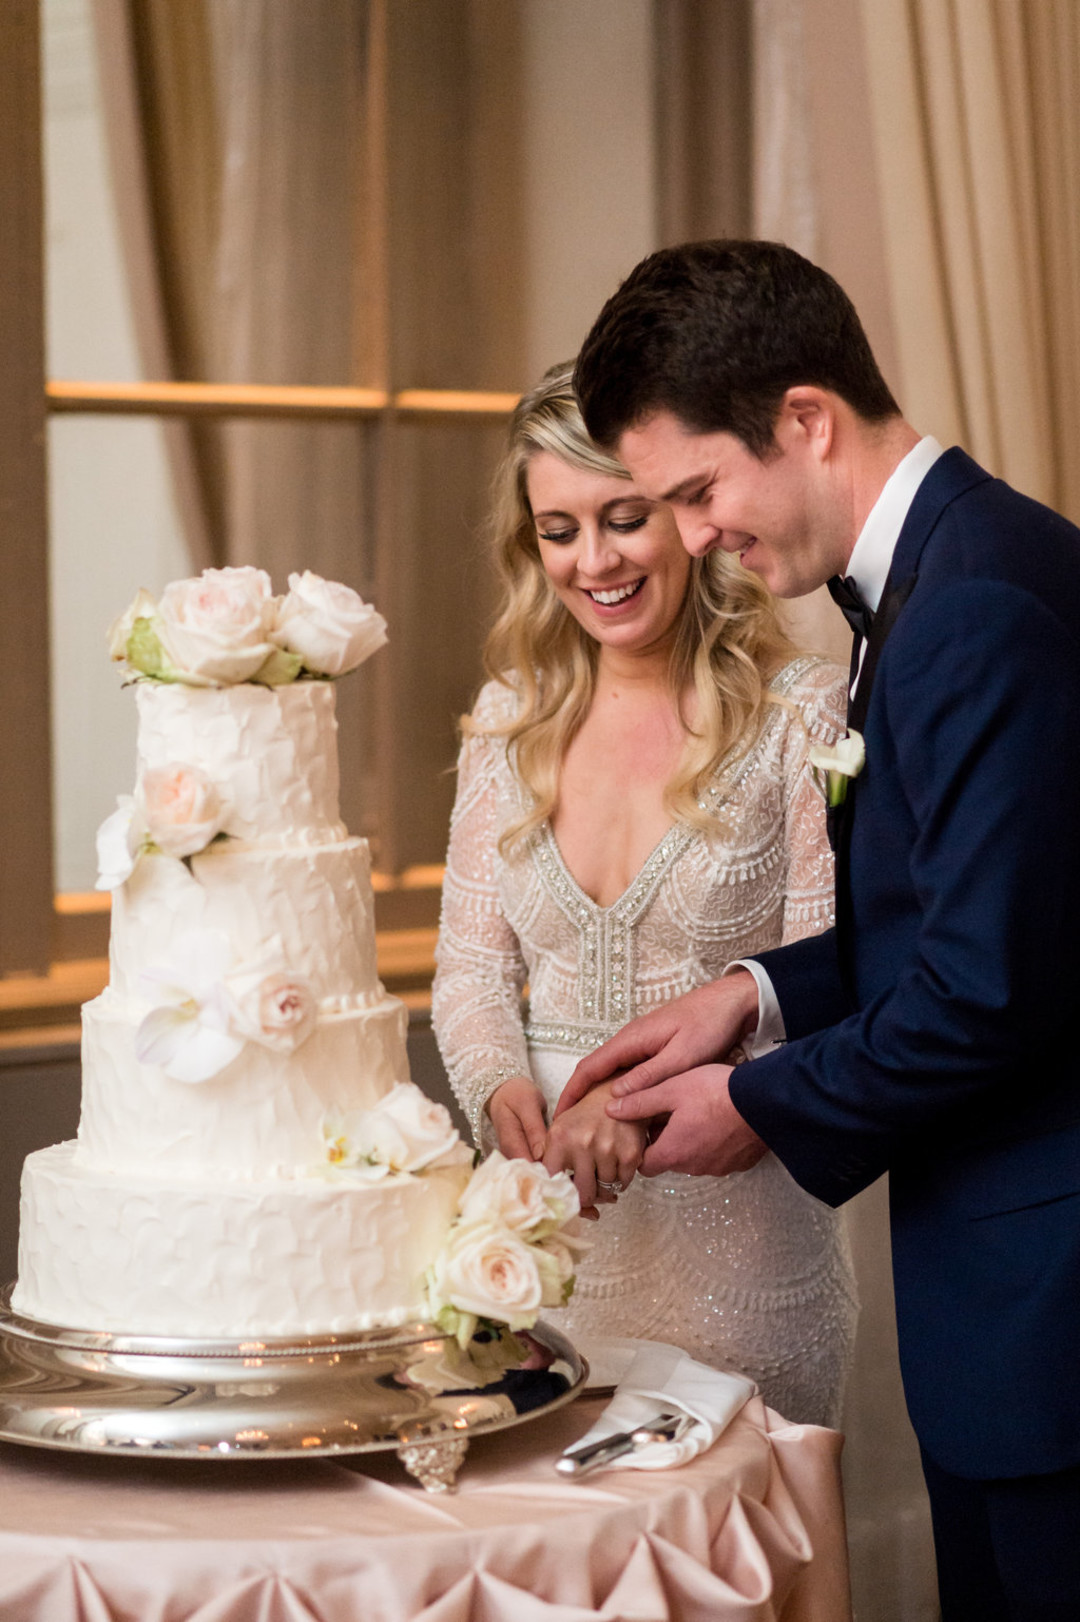 Bride and Groom Cutting the Cake The Standard Room Chicago Wedding Julia Franzosa Photography